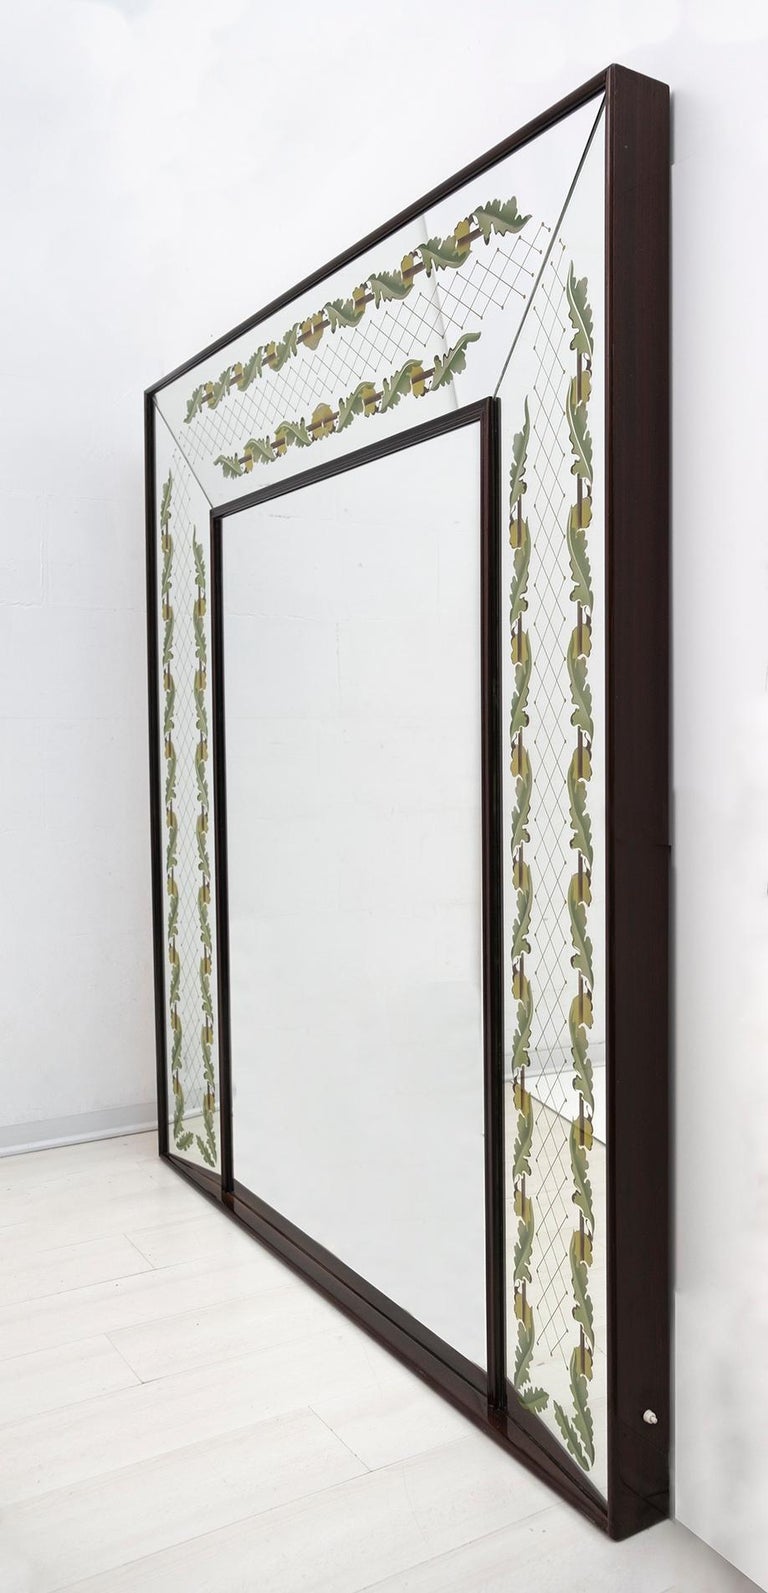 Large Mid Century Italian Modern Decorative Mirror by Luigi Brusotti, 1940s
Large mirror, backlit along the perimeter, corresponding to the decorative motifs in yellow and green drawn on the front. Solid wood structure.
Probably produced by